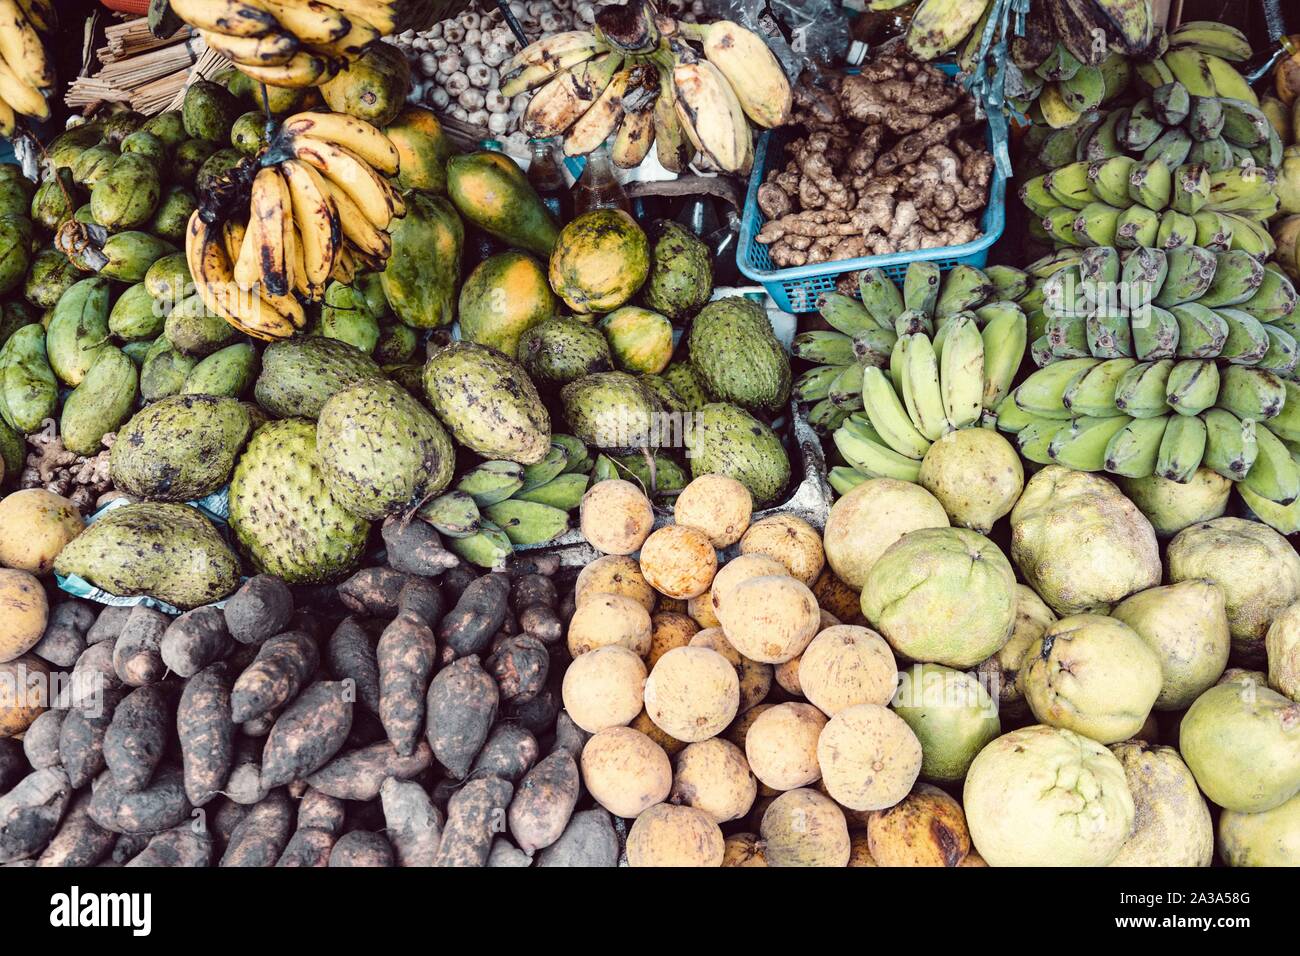 Fruit at a street market in a tropical country Stock Photo